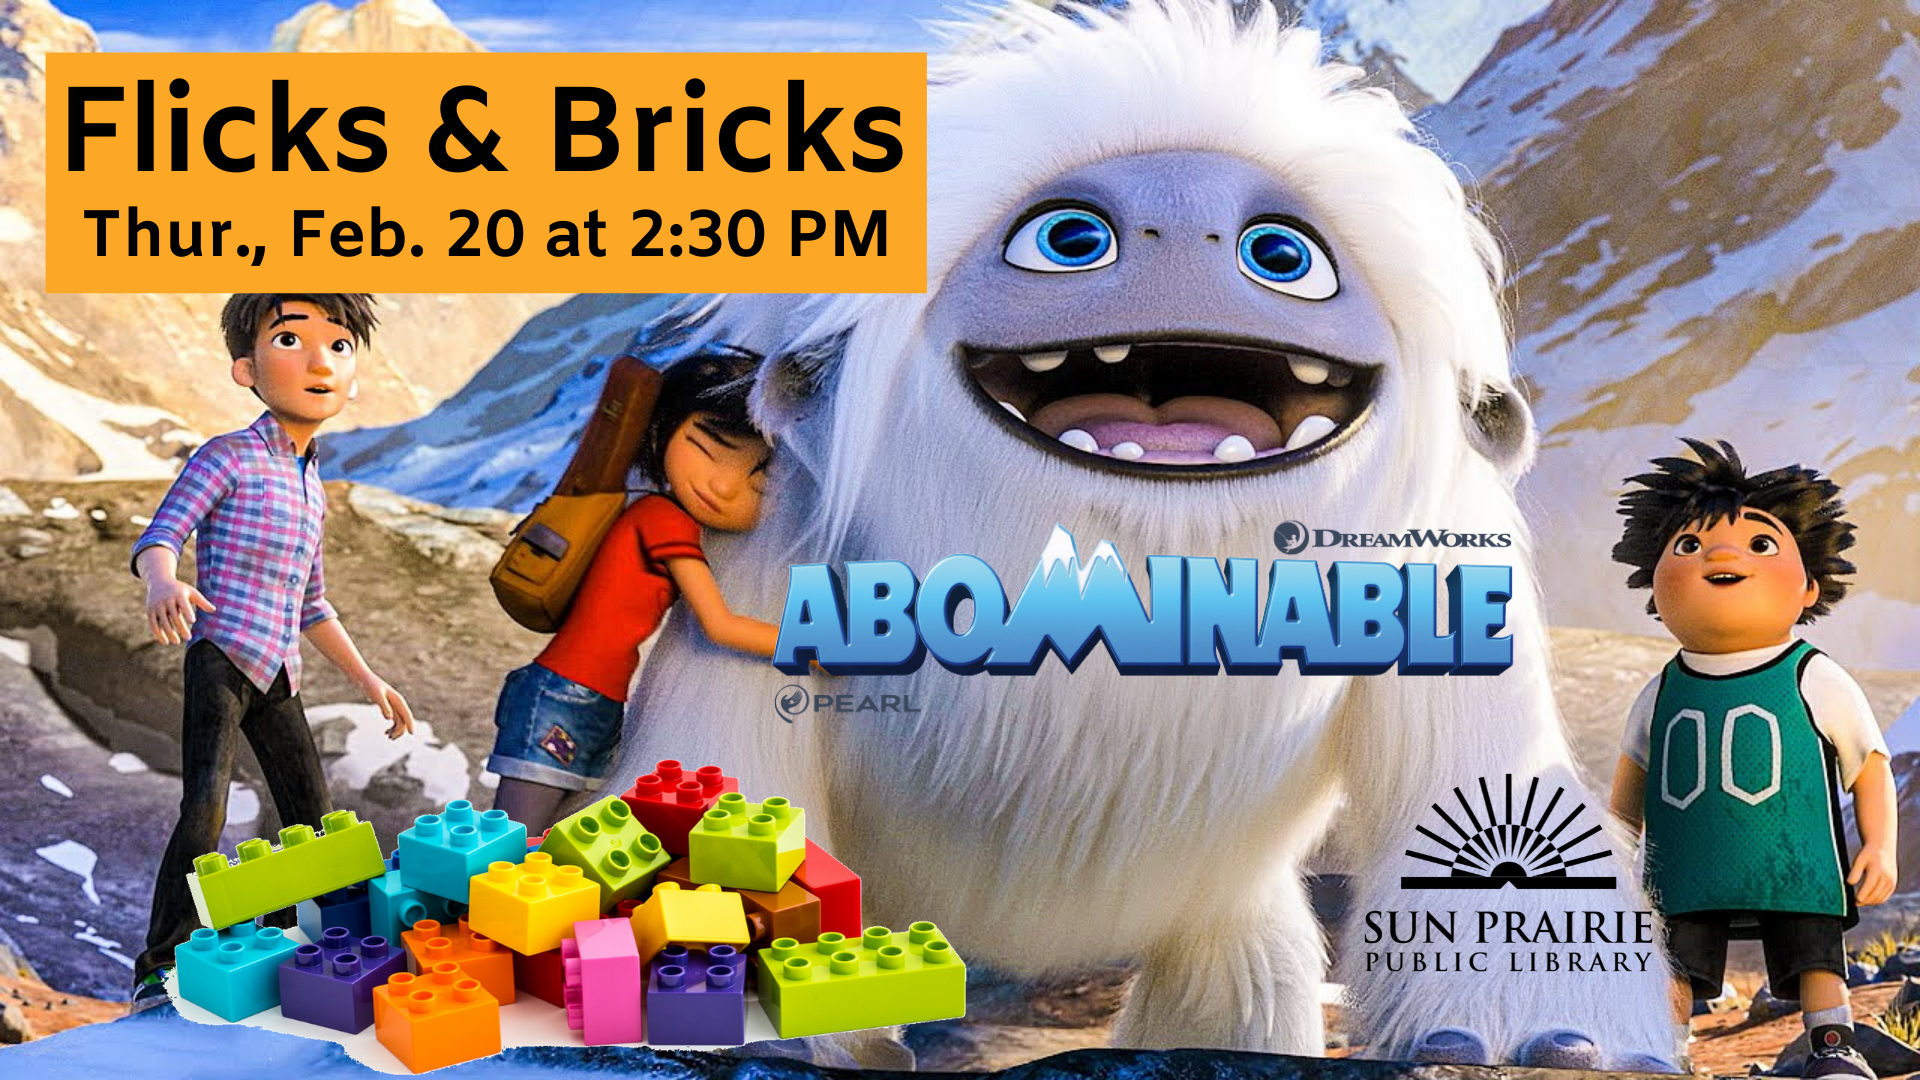 abominable movie image with date and time of event